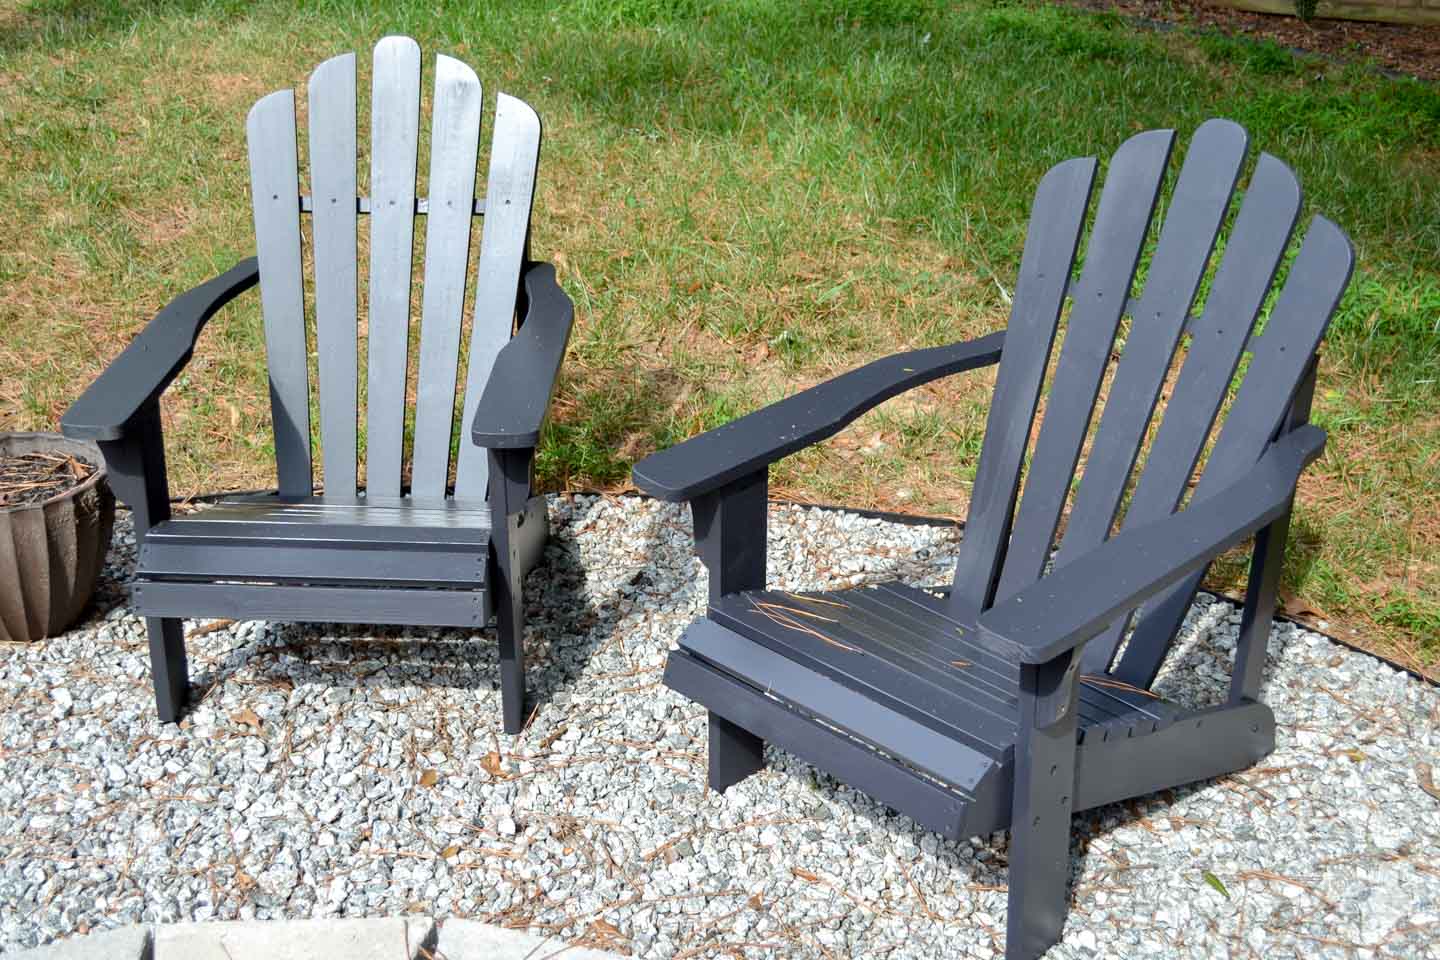 What Color Should I Paint My Adirondack Chairs - Visual Motley